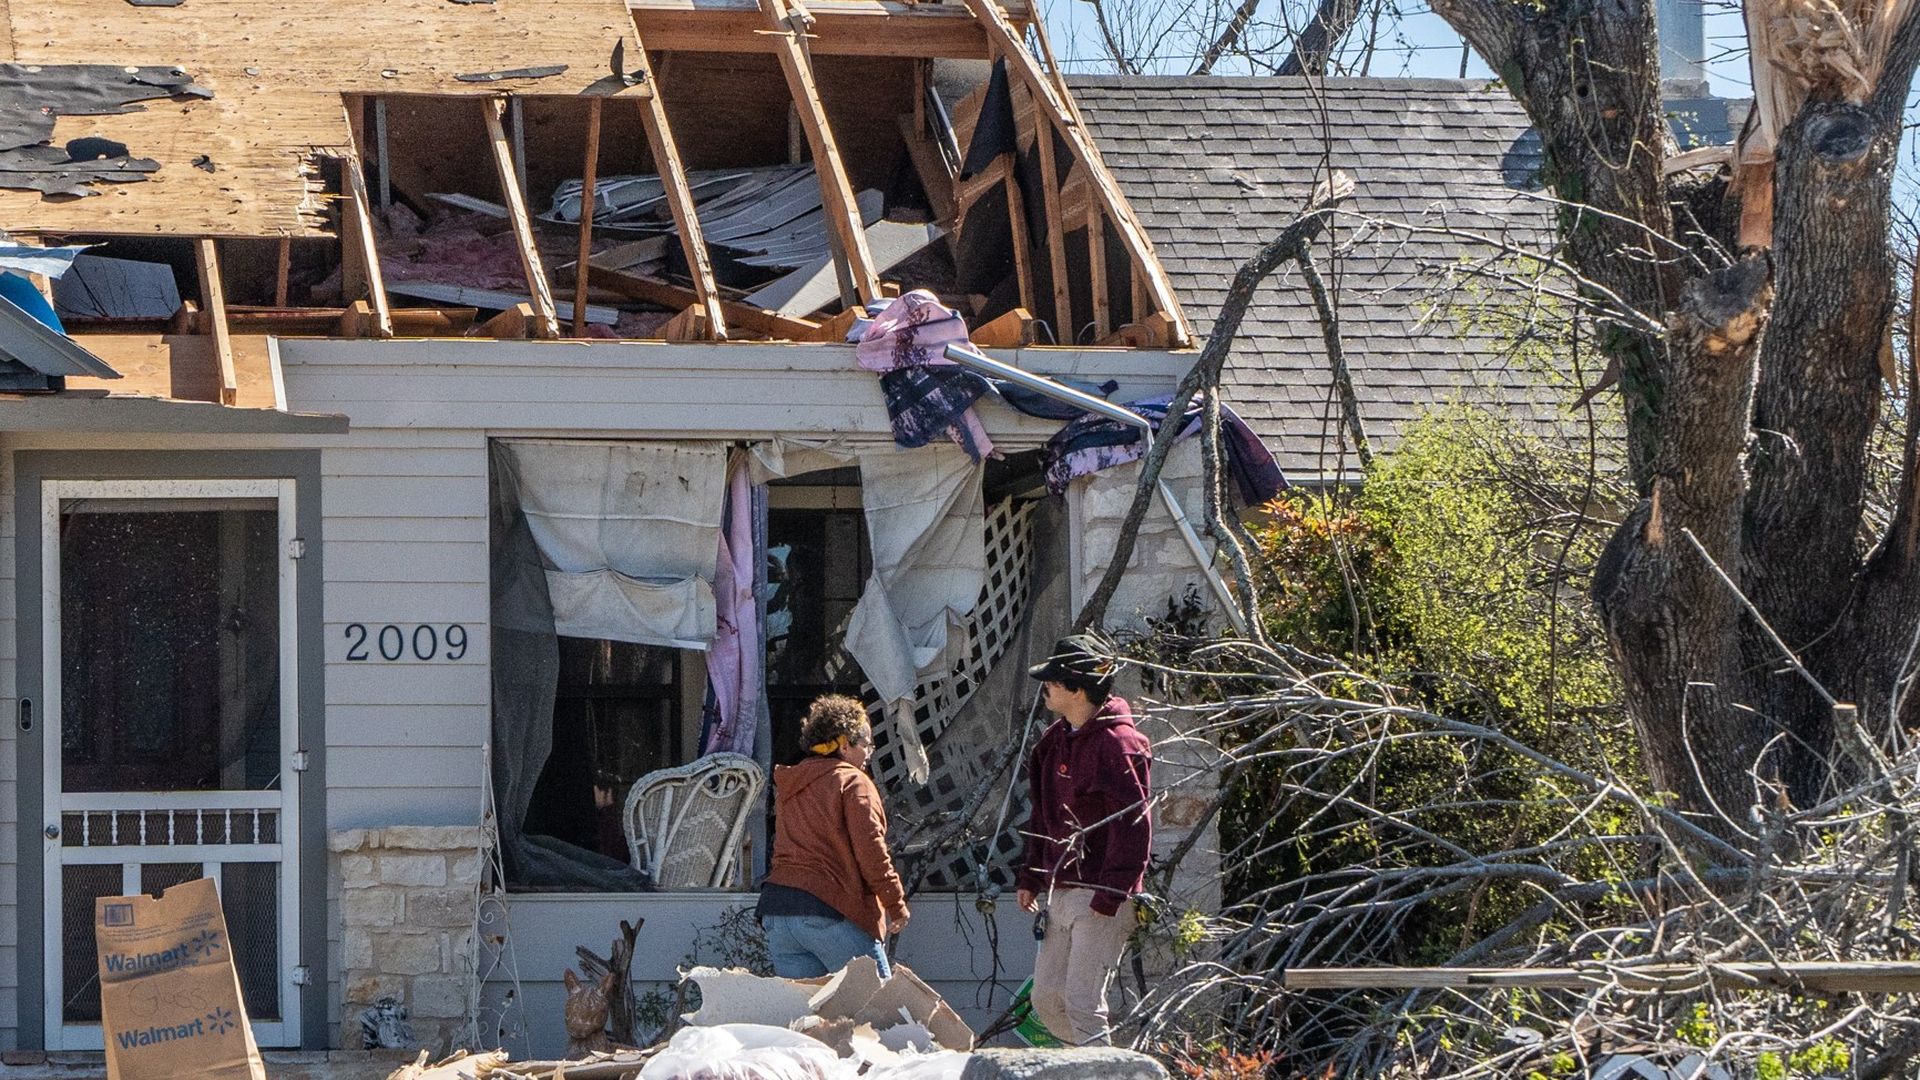 People look at their damaged house after tornados in Round Rock, Texas, the United States on March 22, 2022